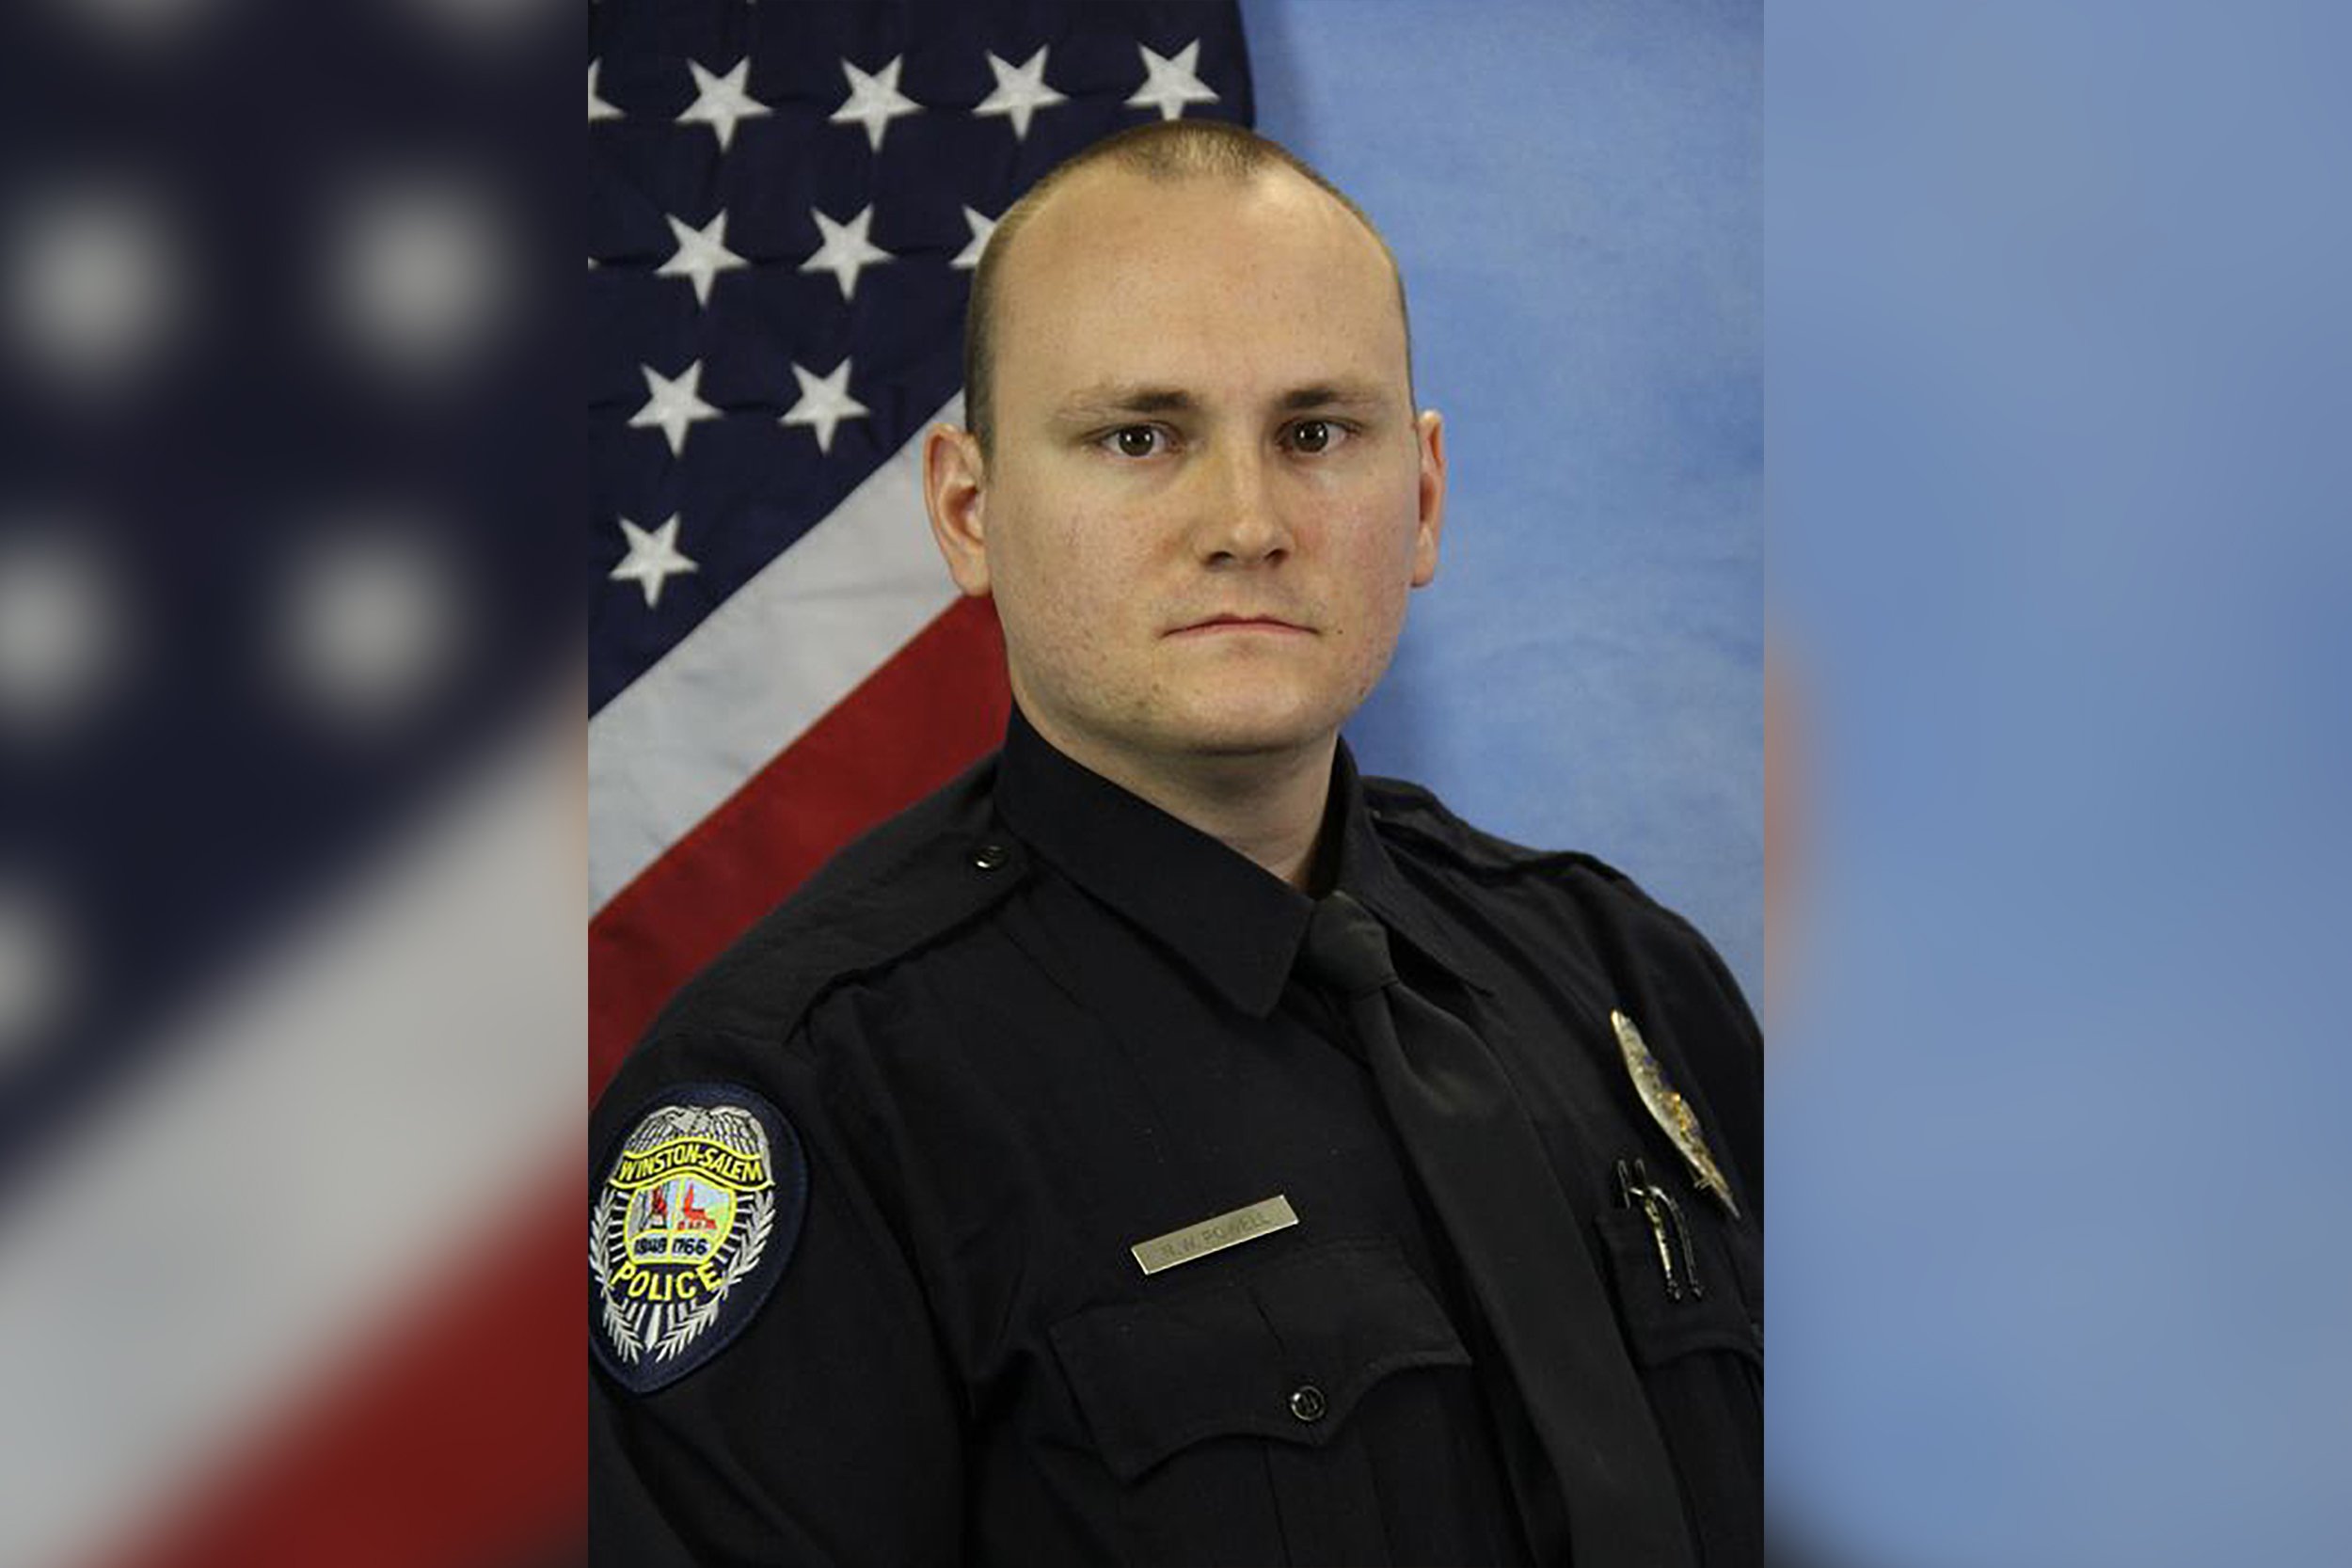 North Carolina Police Officer and Suspect Shot During Traffic Stop